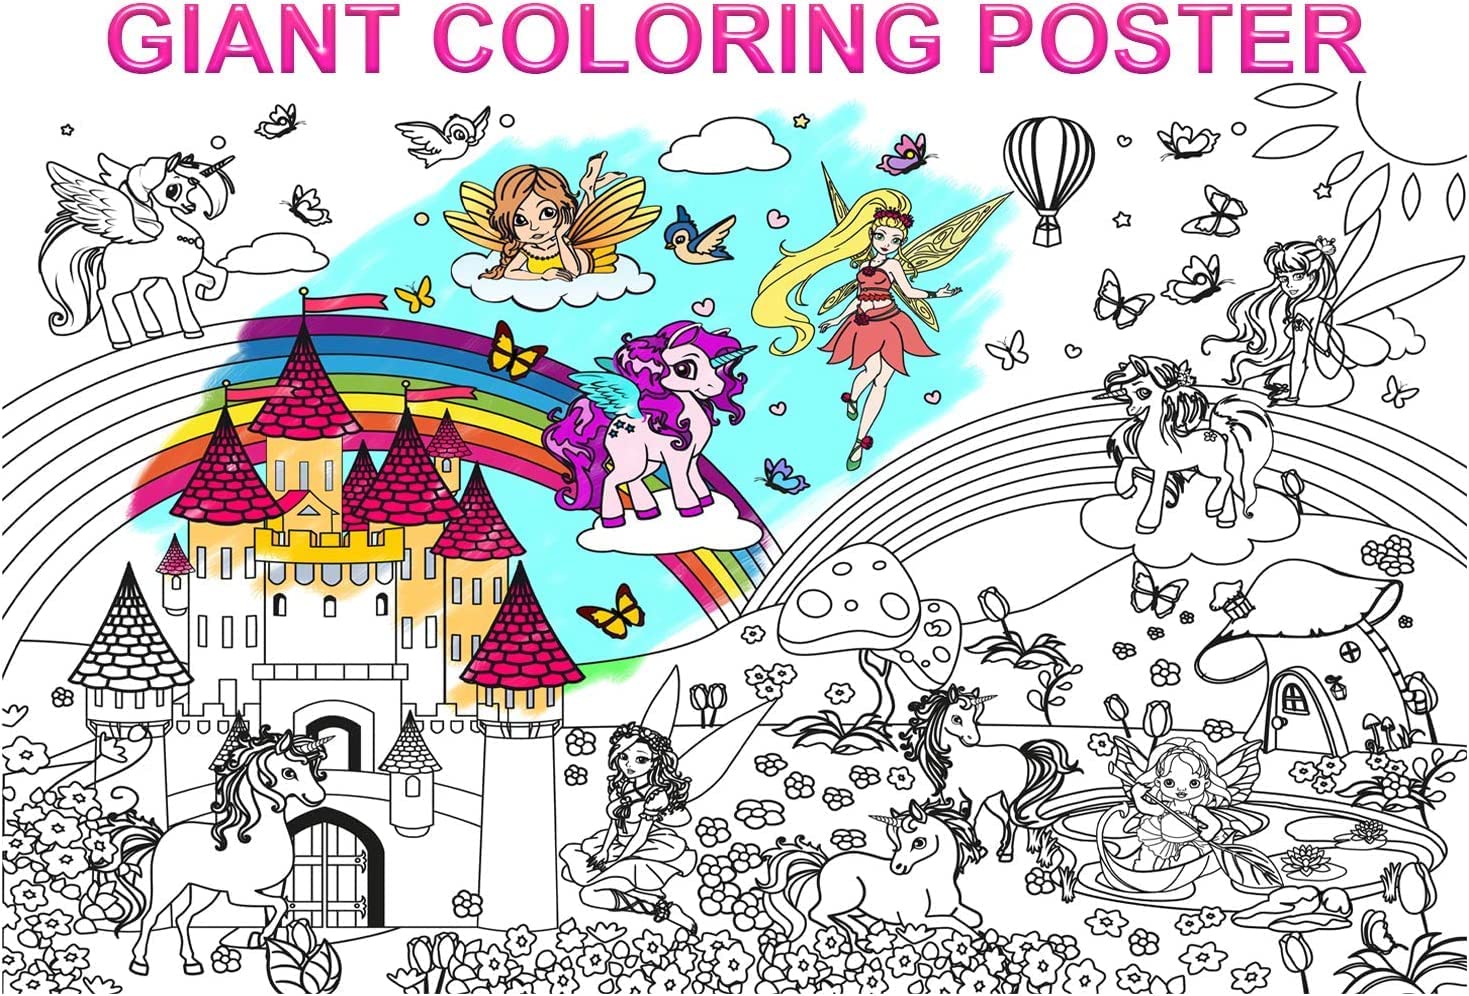 Coloring poster for children, unicorn and fairy